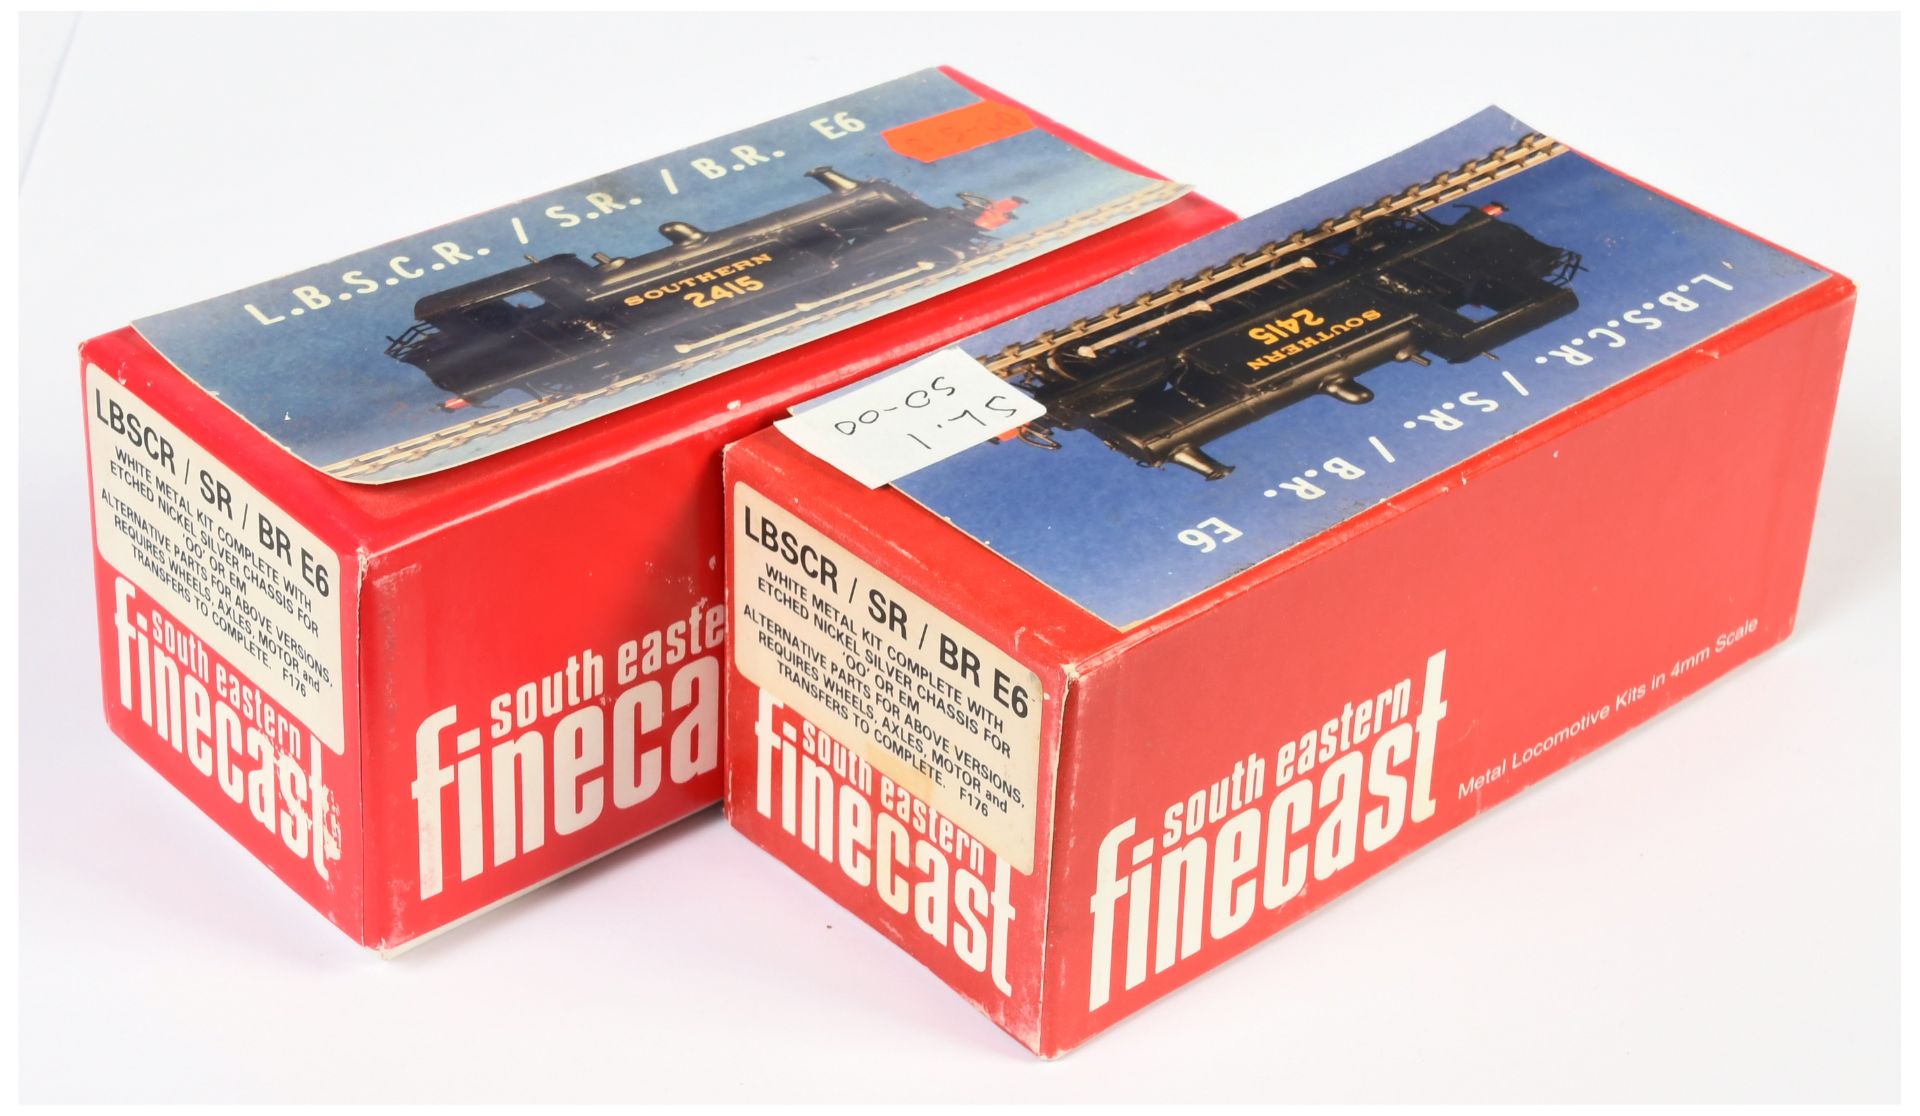 Wills Finecast OO Gauge unmade Kits comprising of 